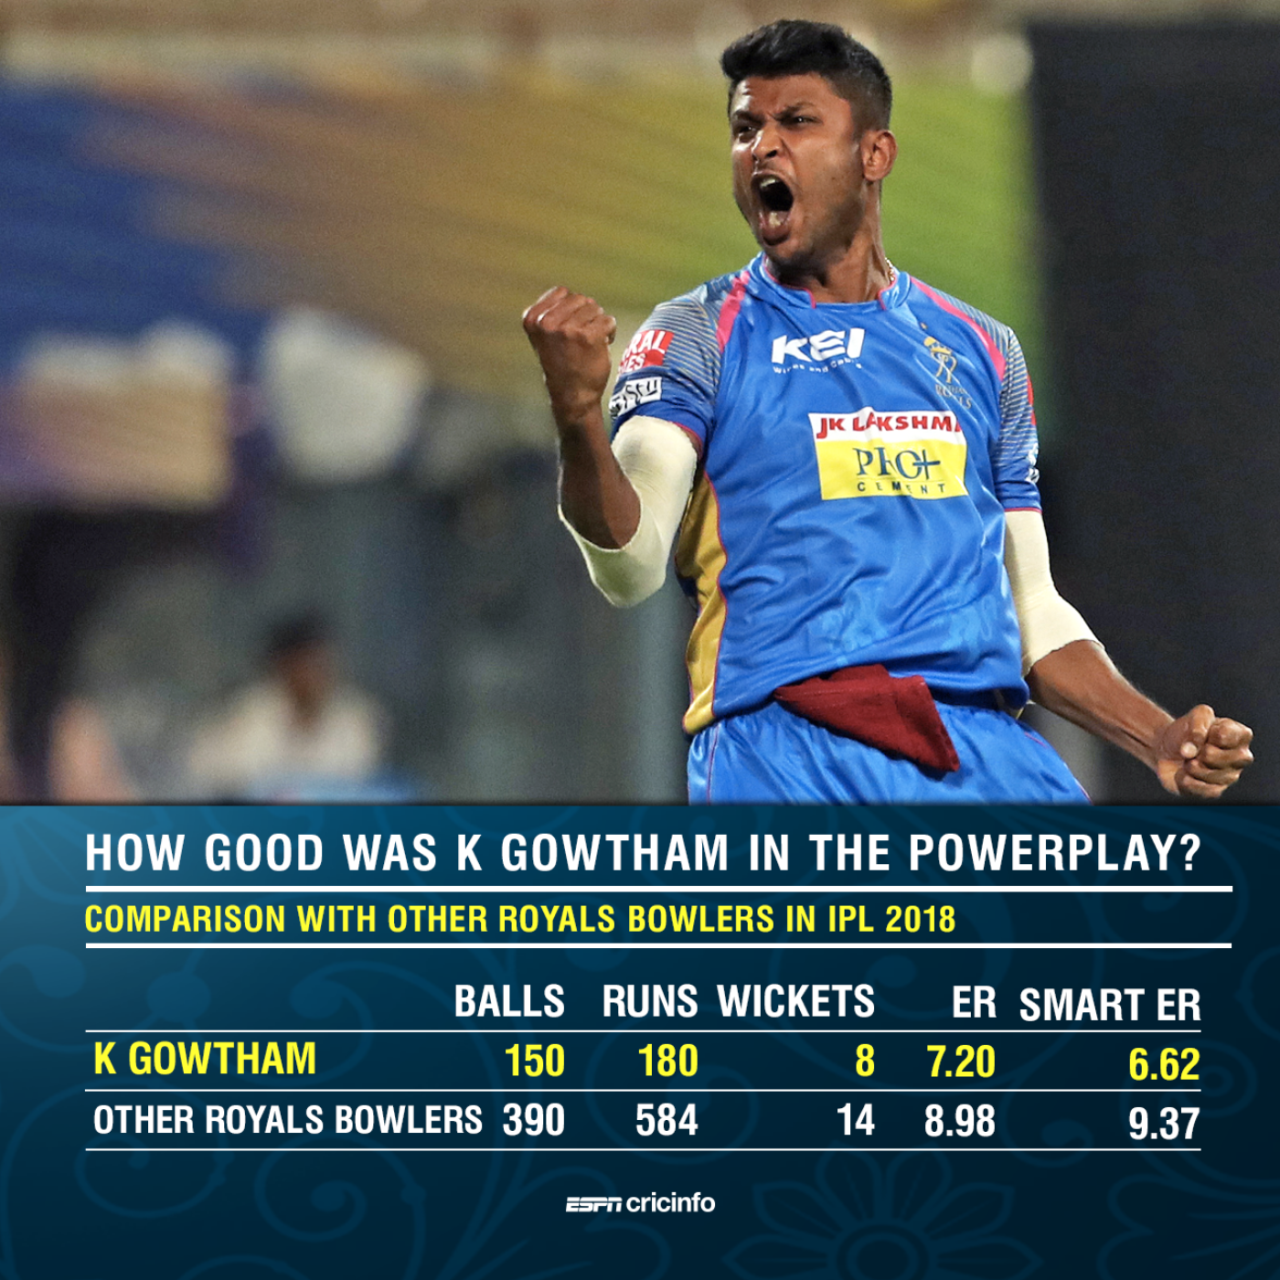 Graphic: K Gowtham was Rajasthan Royals' first-choice opening bowler in IPL 2018